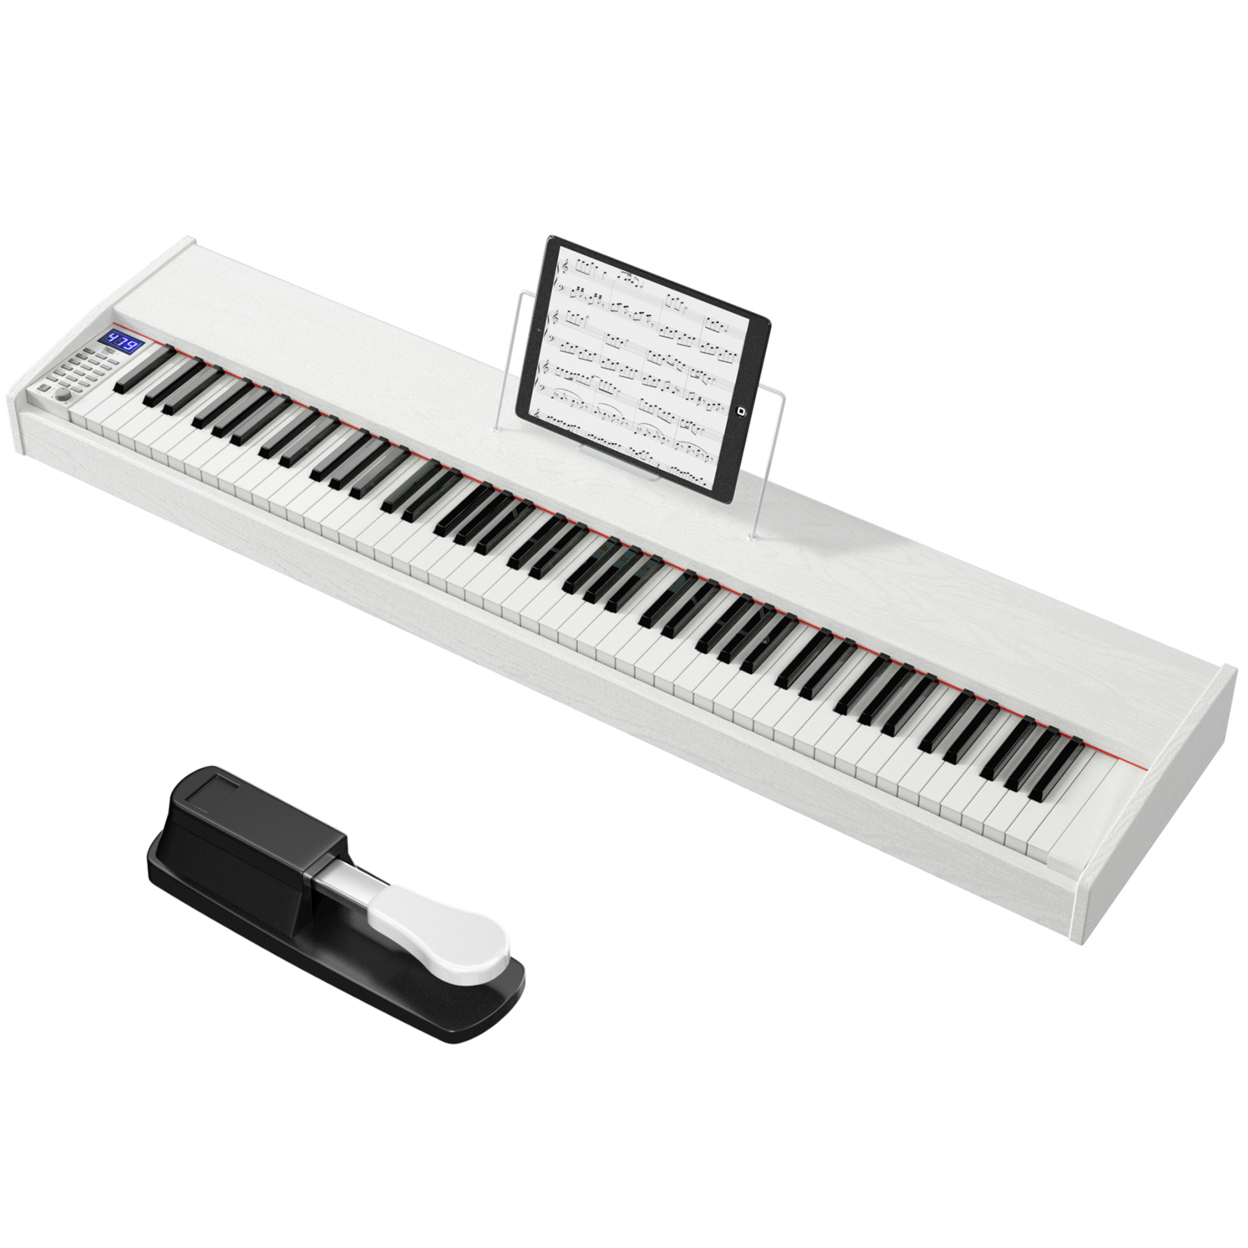 88-Key Full Size Digital Piano Weighted Keyboard W/ Sustain Pedal Black/White - Black